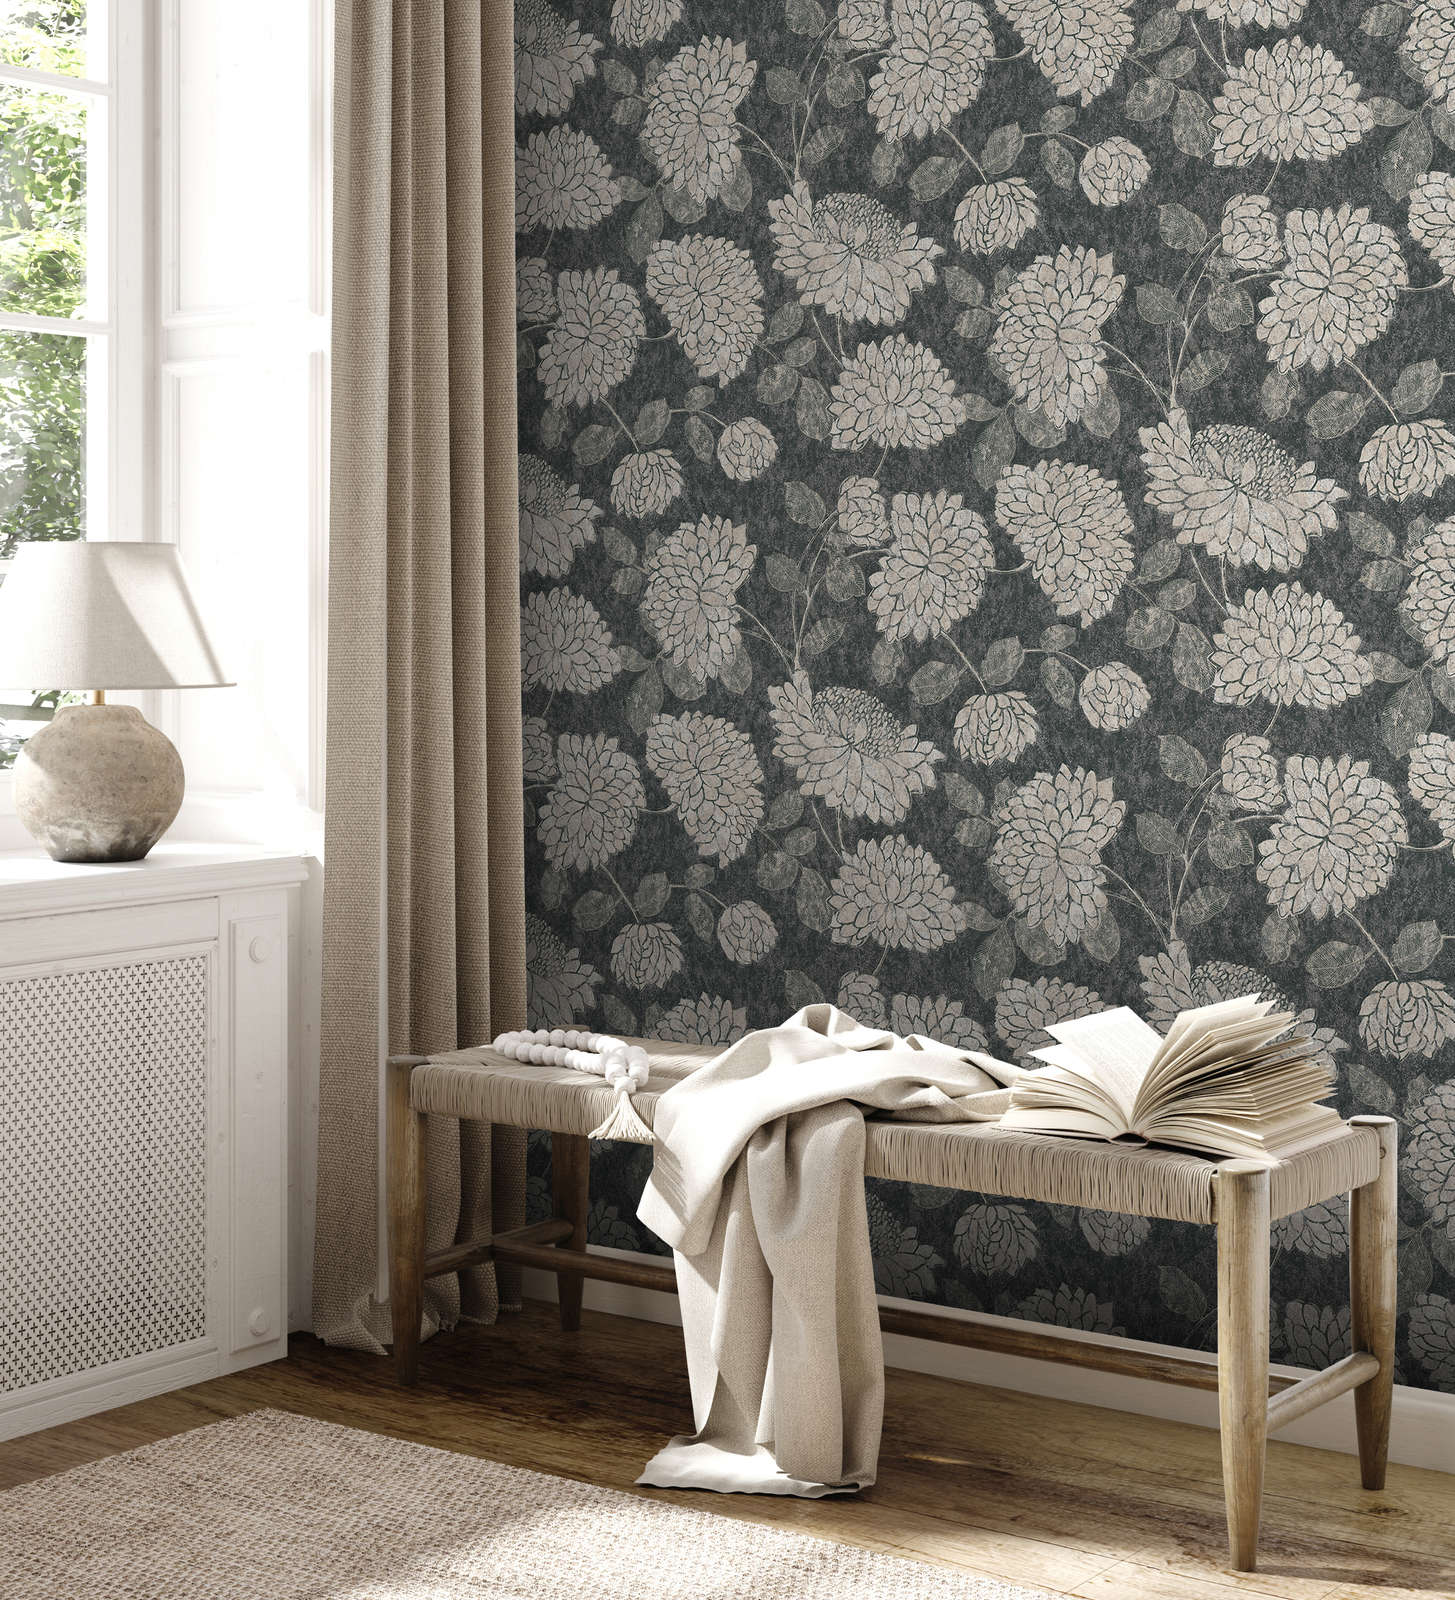             Pattern wallpaper with flowers with a slight sheen - black, white, silver
        